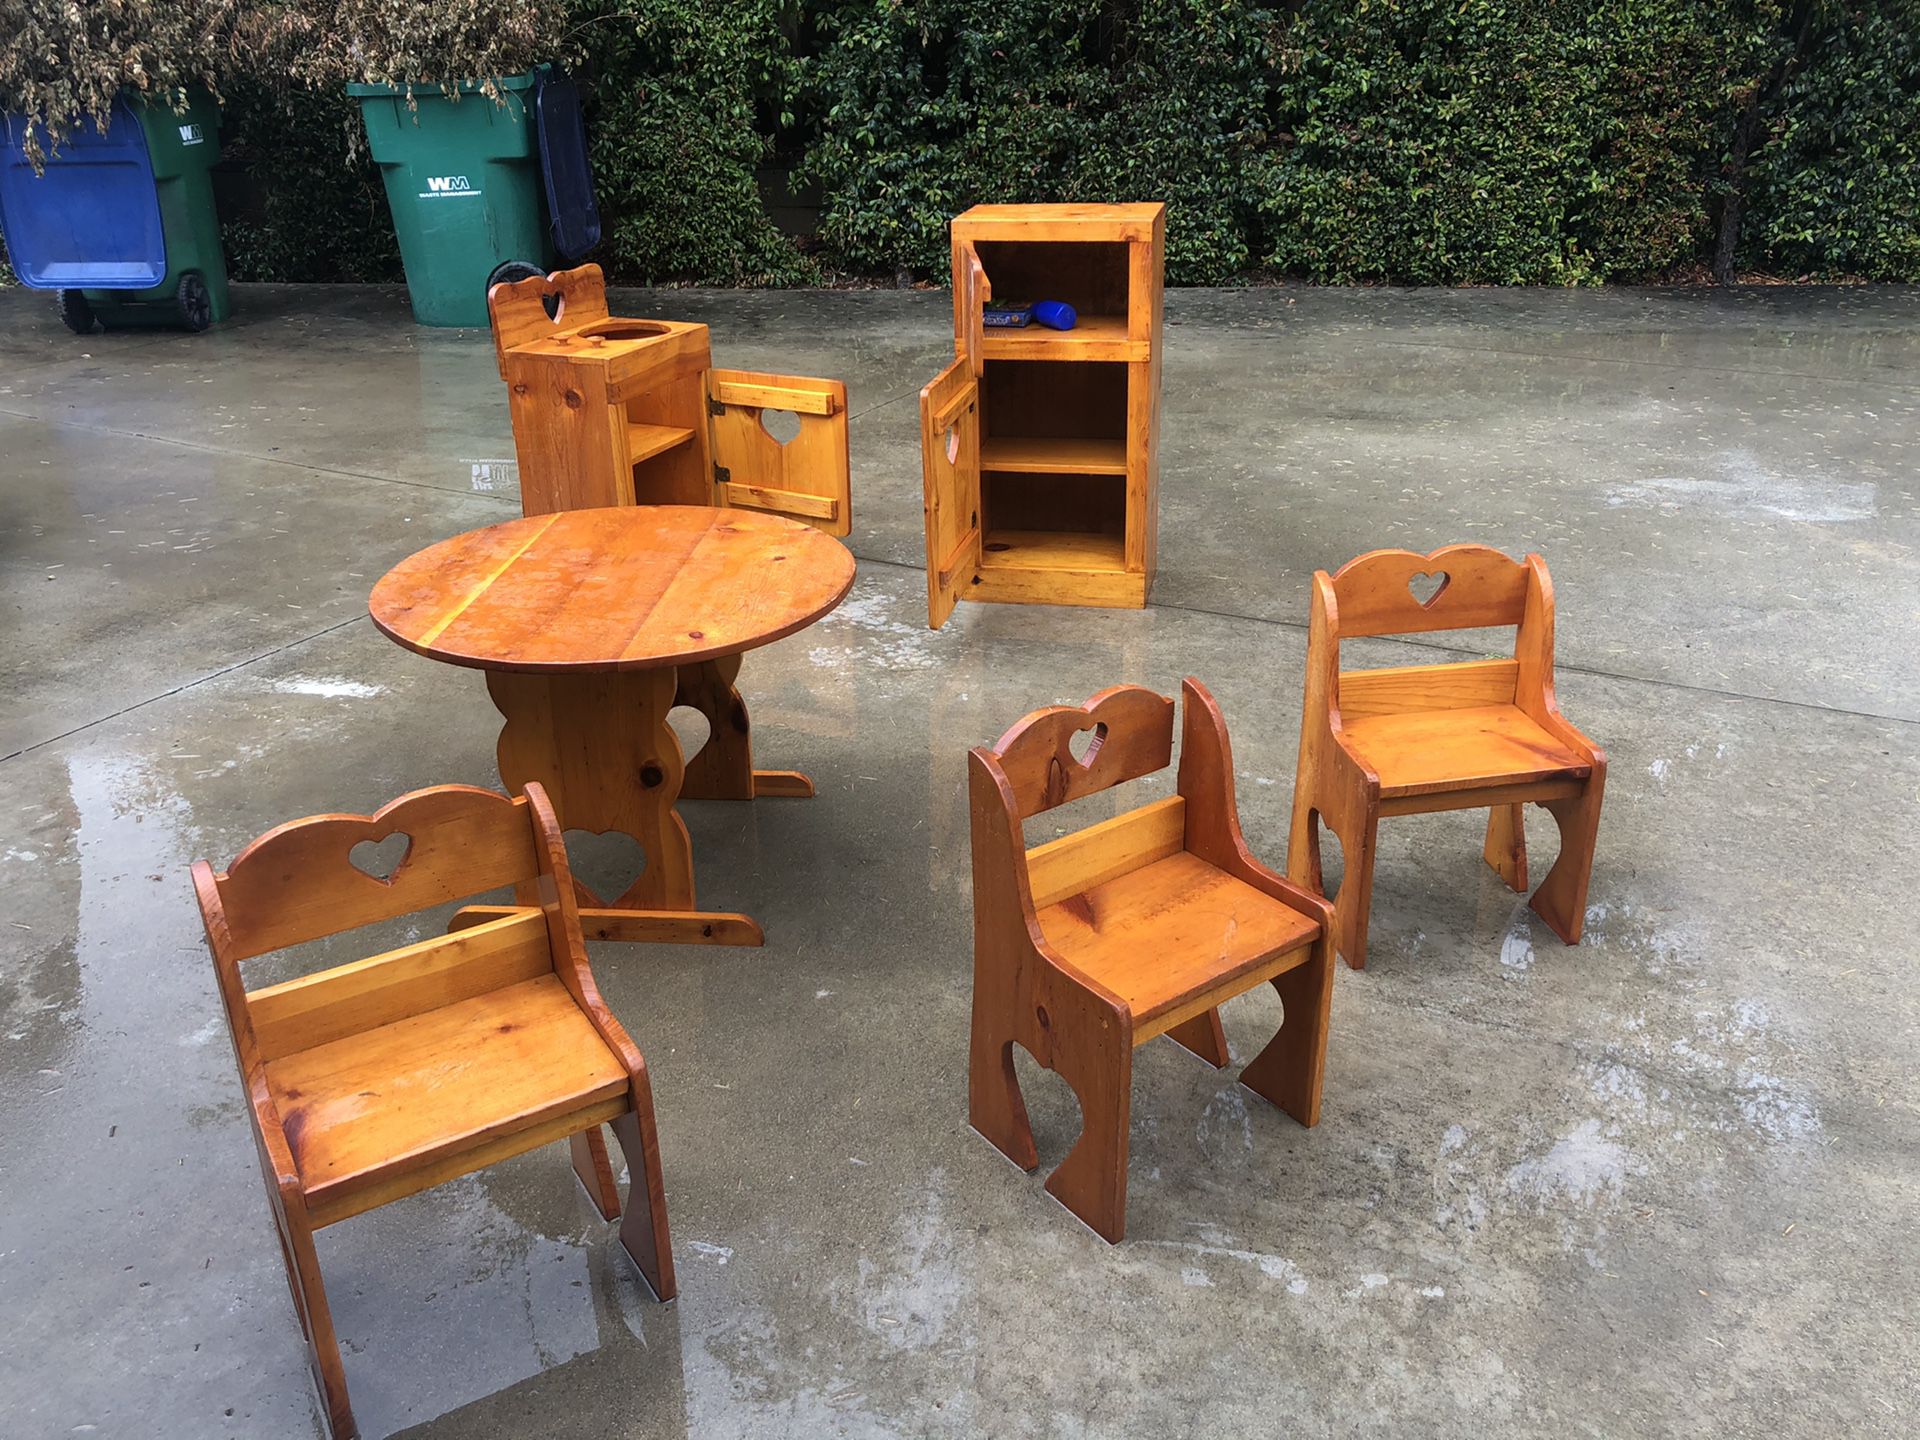 All custom wood child’s kitchen and table with chairs